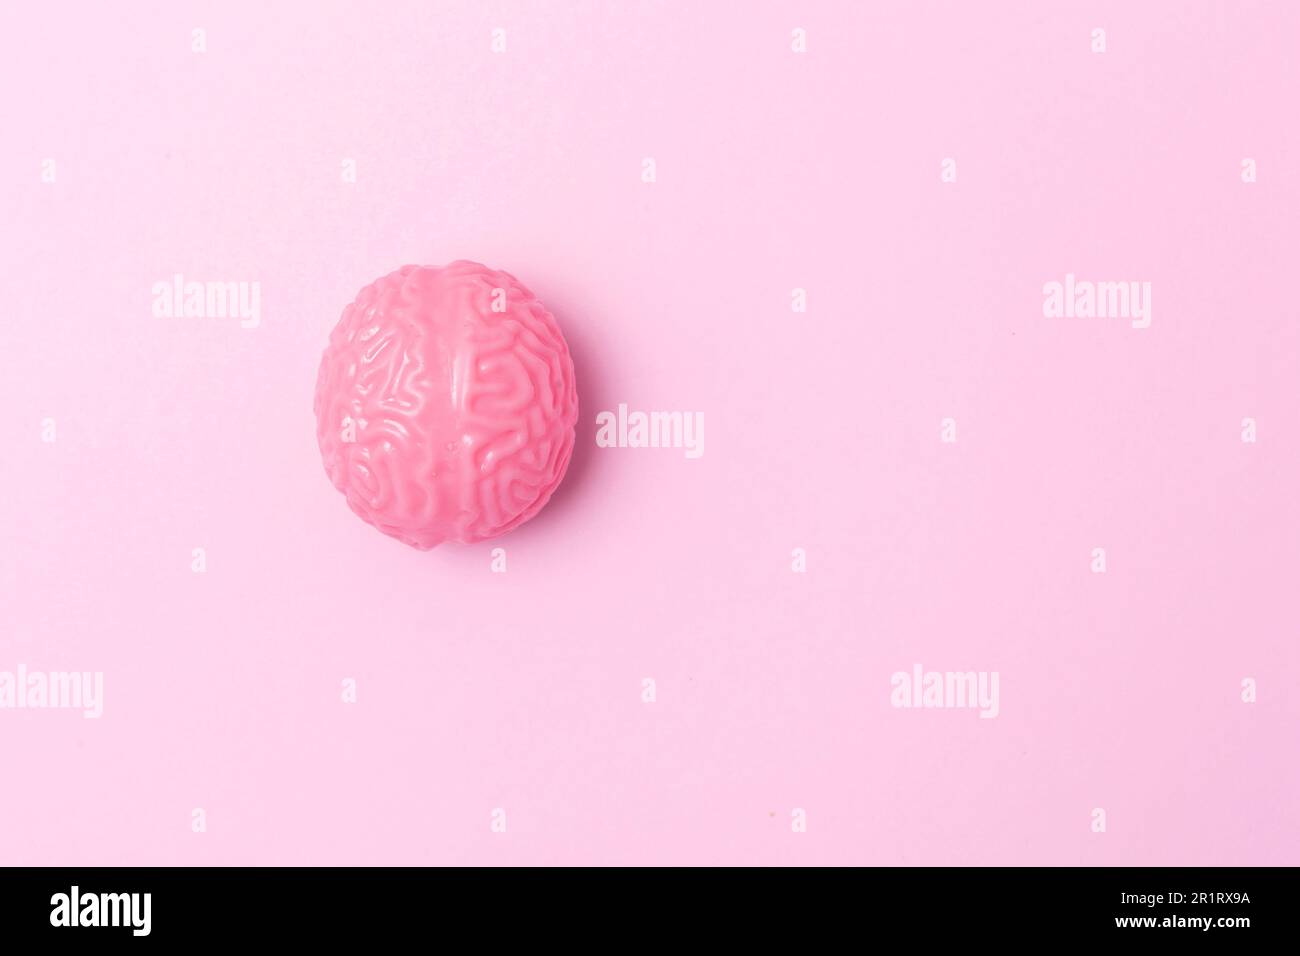 Brain on the pink background Stock Photo